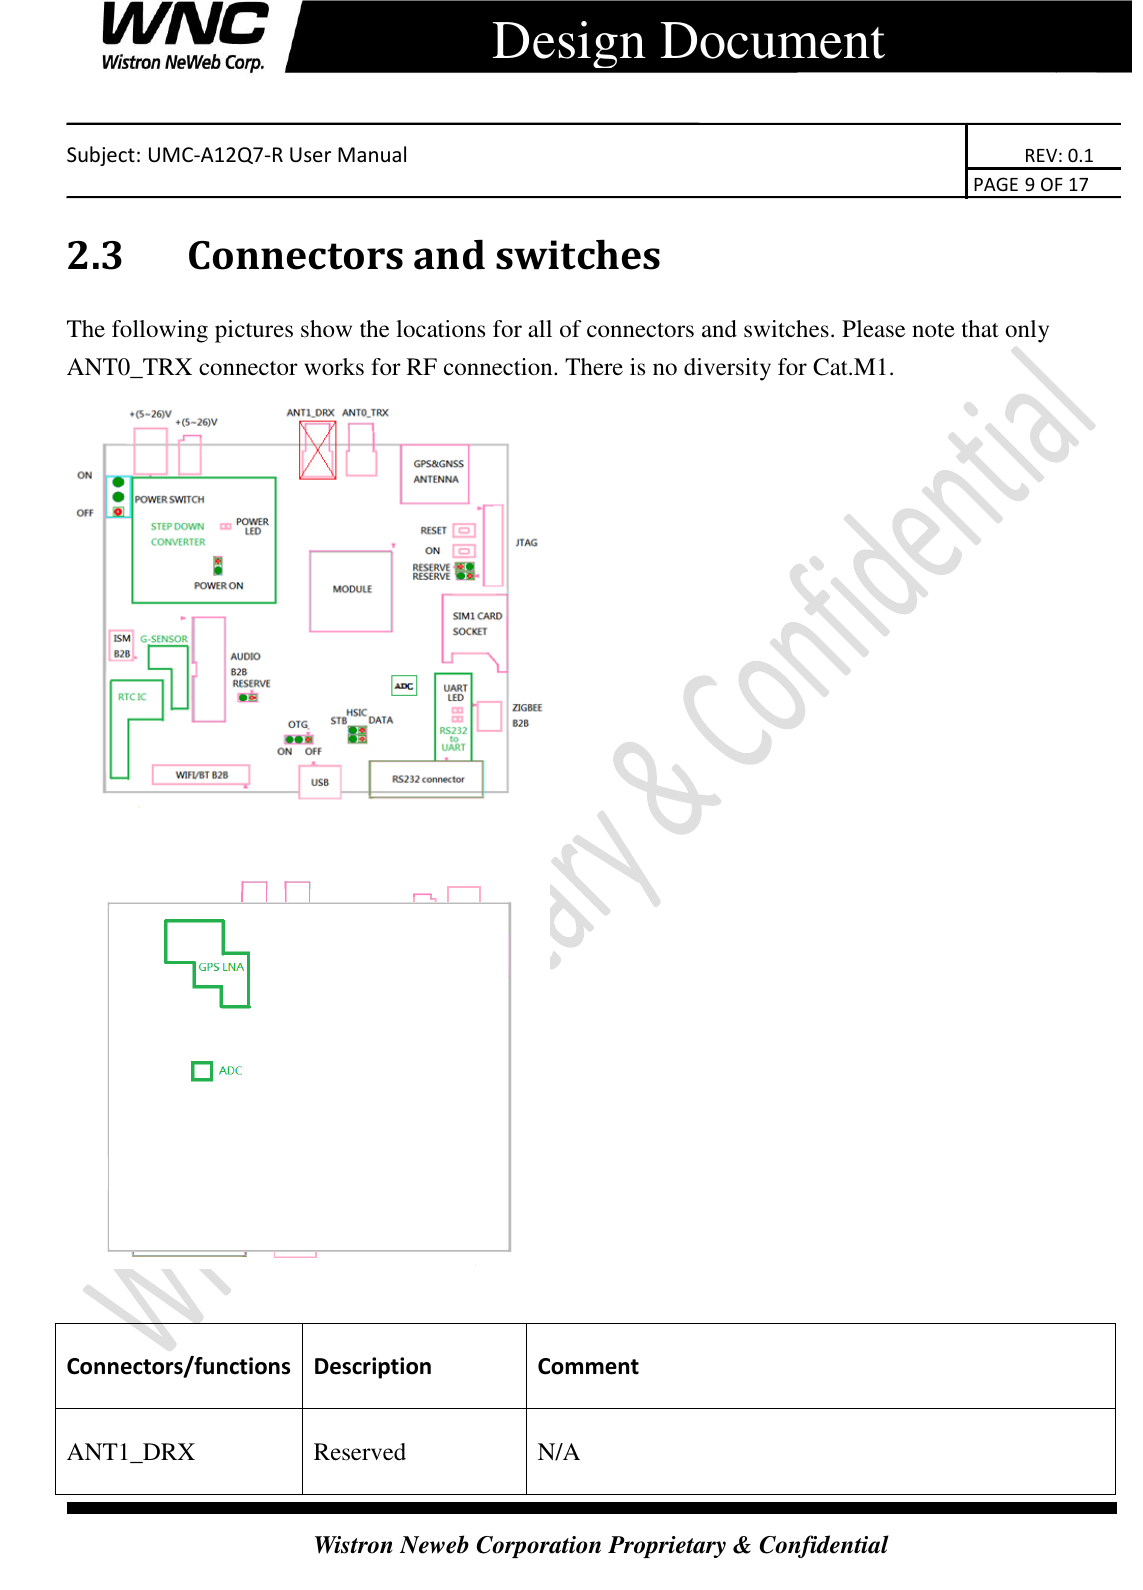    Subject: UMC-A12Q7-R User Manual                                                                      REV: 0.1                                                                                        PAGE 9 OF 17  Wistron Neweb Corporation Proprietary &amp; Confidential      Design Document 2.3   Connectors and switches The following pictures show the locations for all of connectors and switches. Please note that only ANT0_TRX connector works for RF connection. There is no diversity for Cat.M1.    Connectors/functions Description Comment ANT1_DRX Reserved N/A 